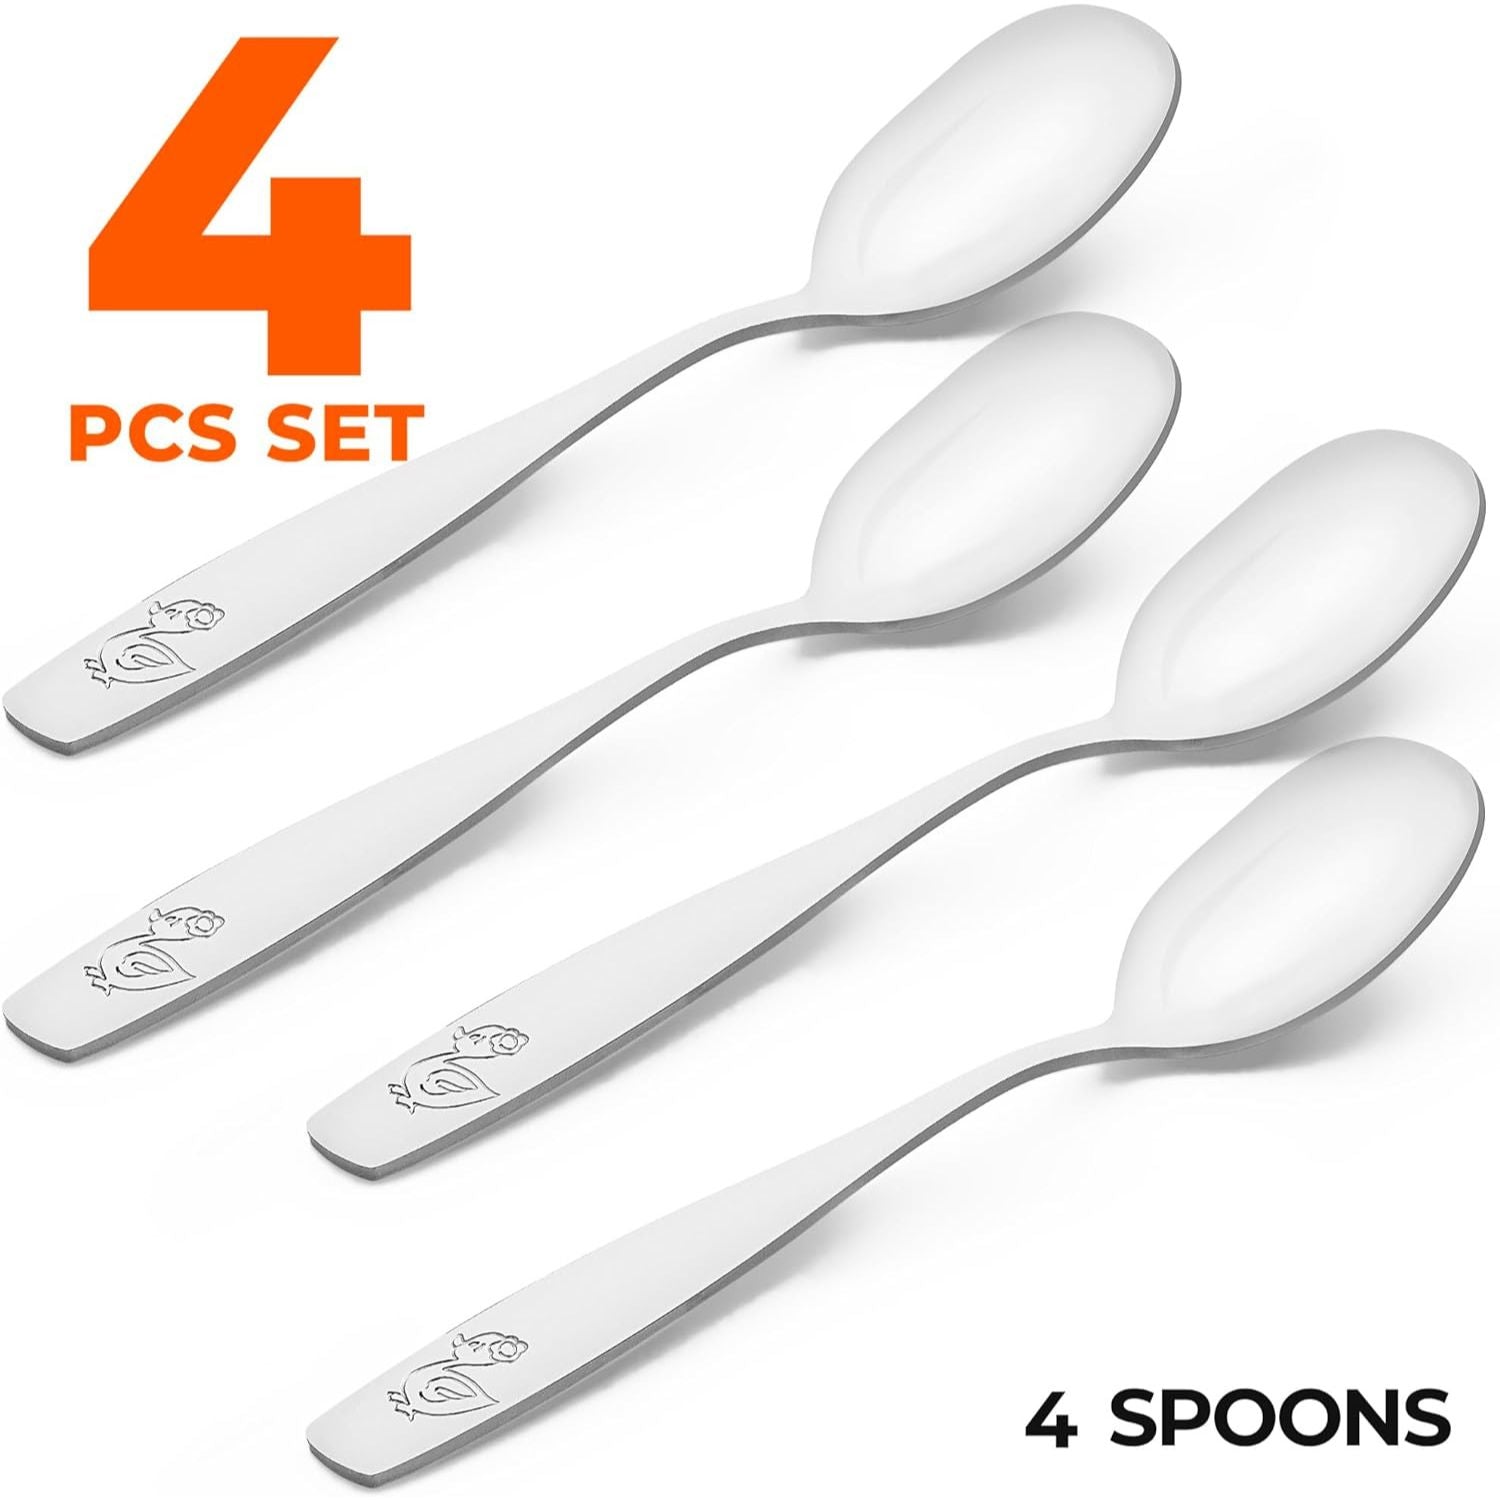 Jocate Silicone Baby Spoons for Baby Led Weaning 3 Algeria